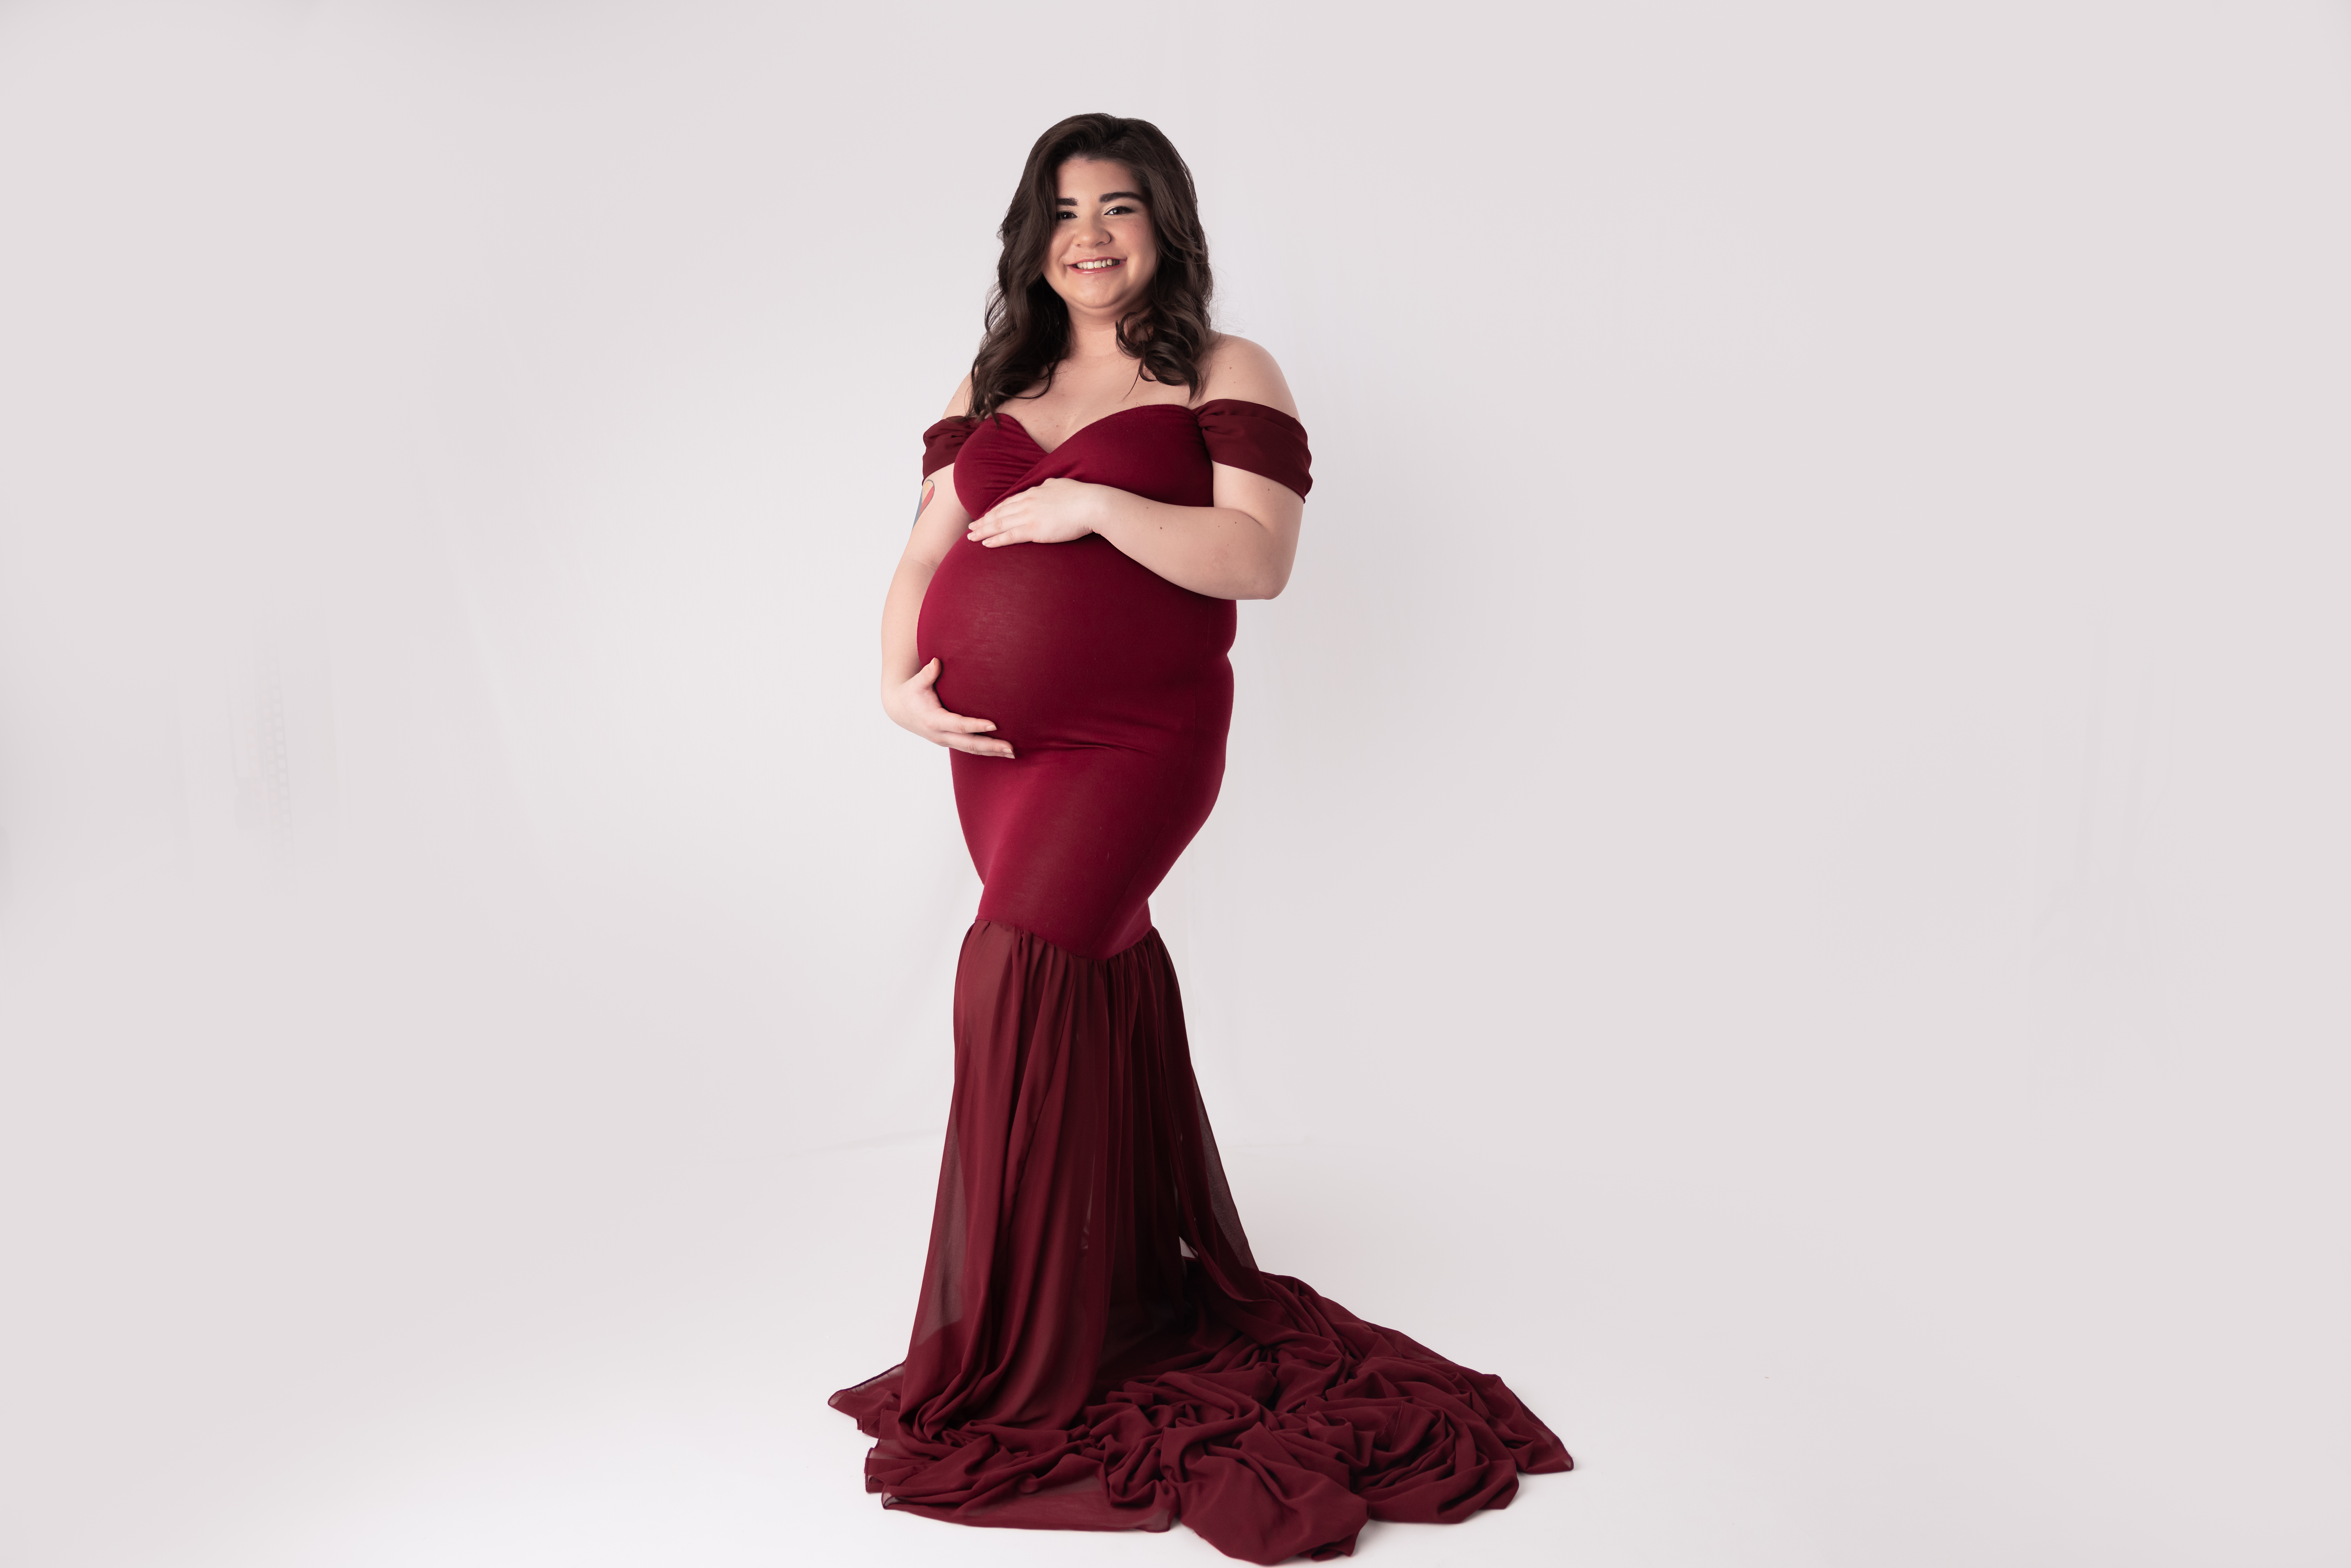 Woman wearing a red gown holding her pregnant belly